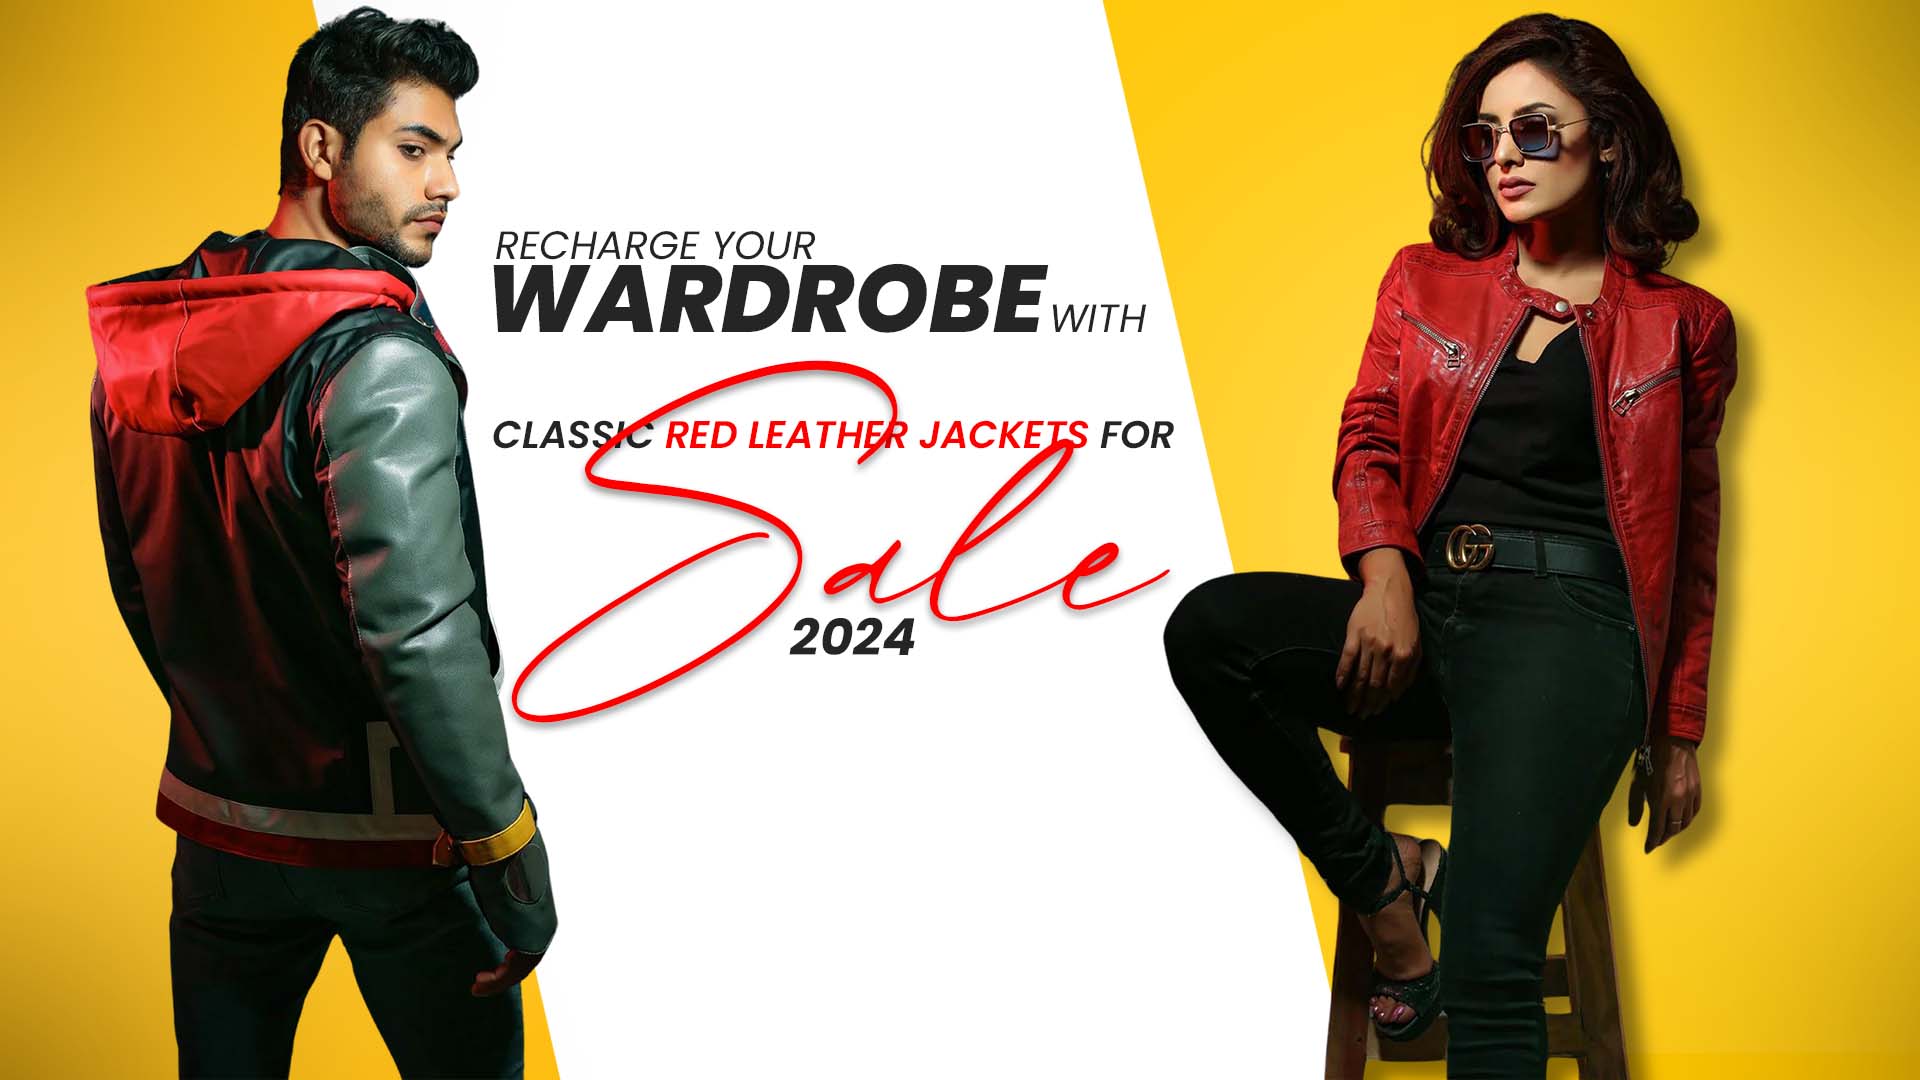 Recharge Your Wardrobe With Classic Red leather Jackets for Sale 2024